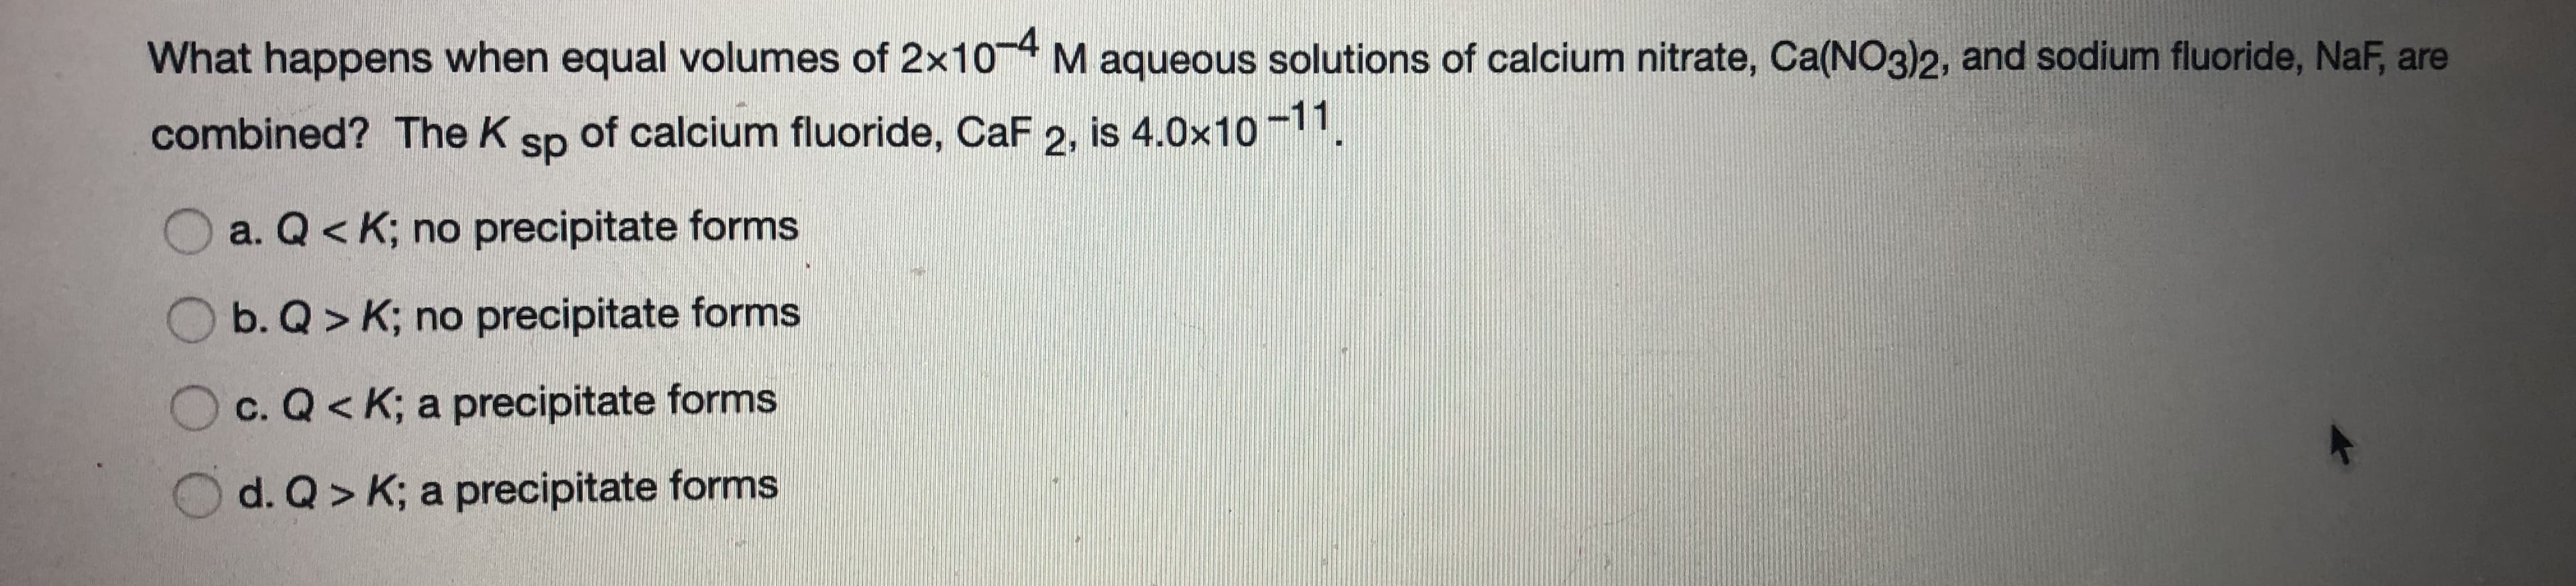 What happens when equal volumes of 2x104 M aqueous solutions of calcium nitrate, Ca(NO3)2, and sodium fluoride, NaF, are
combined? The K
of calcium fluoride, CaF 2, is 4.0x10-11,
sp
O a. Q< K; no precipitate forms
O b. Q > K; no precipitate forms
c. Q< K; a precipitate forms
d. Q> K; a precipitate forms
